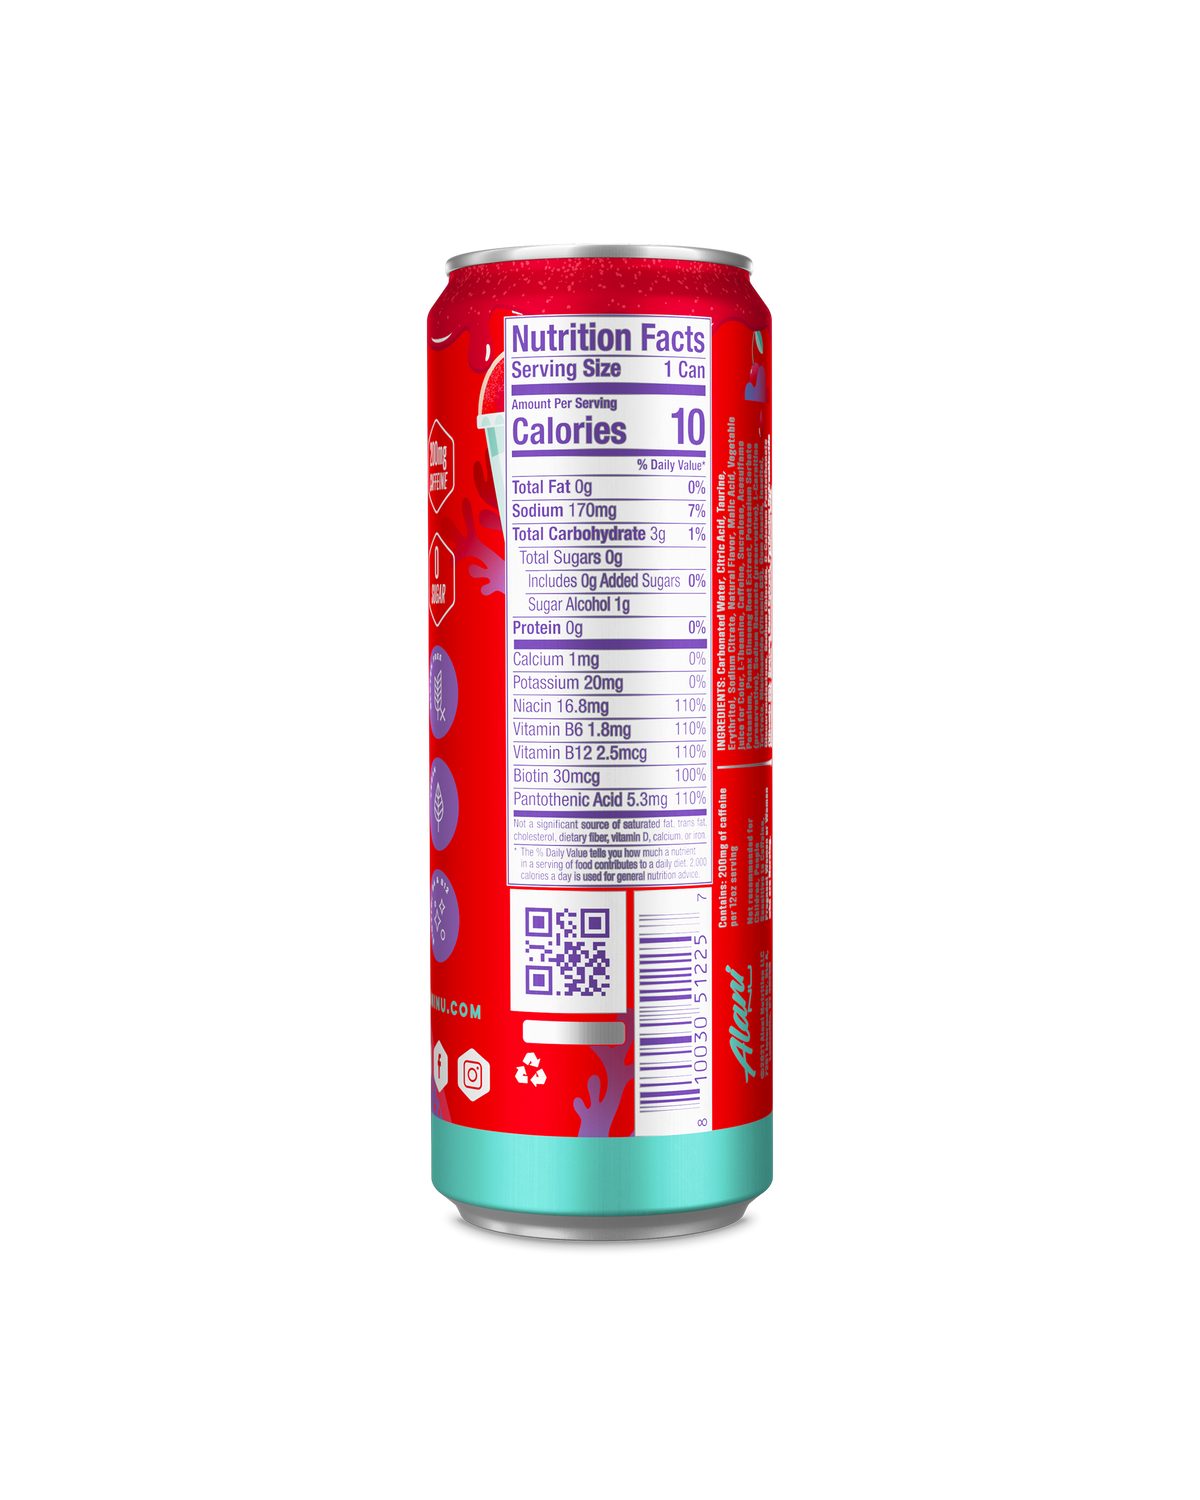 A back view of Energy Drink in Cherry Slush flavor highlighting nutrition facts.